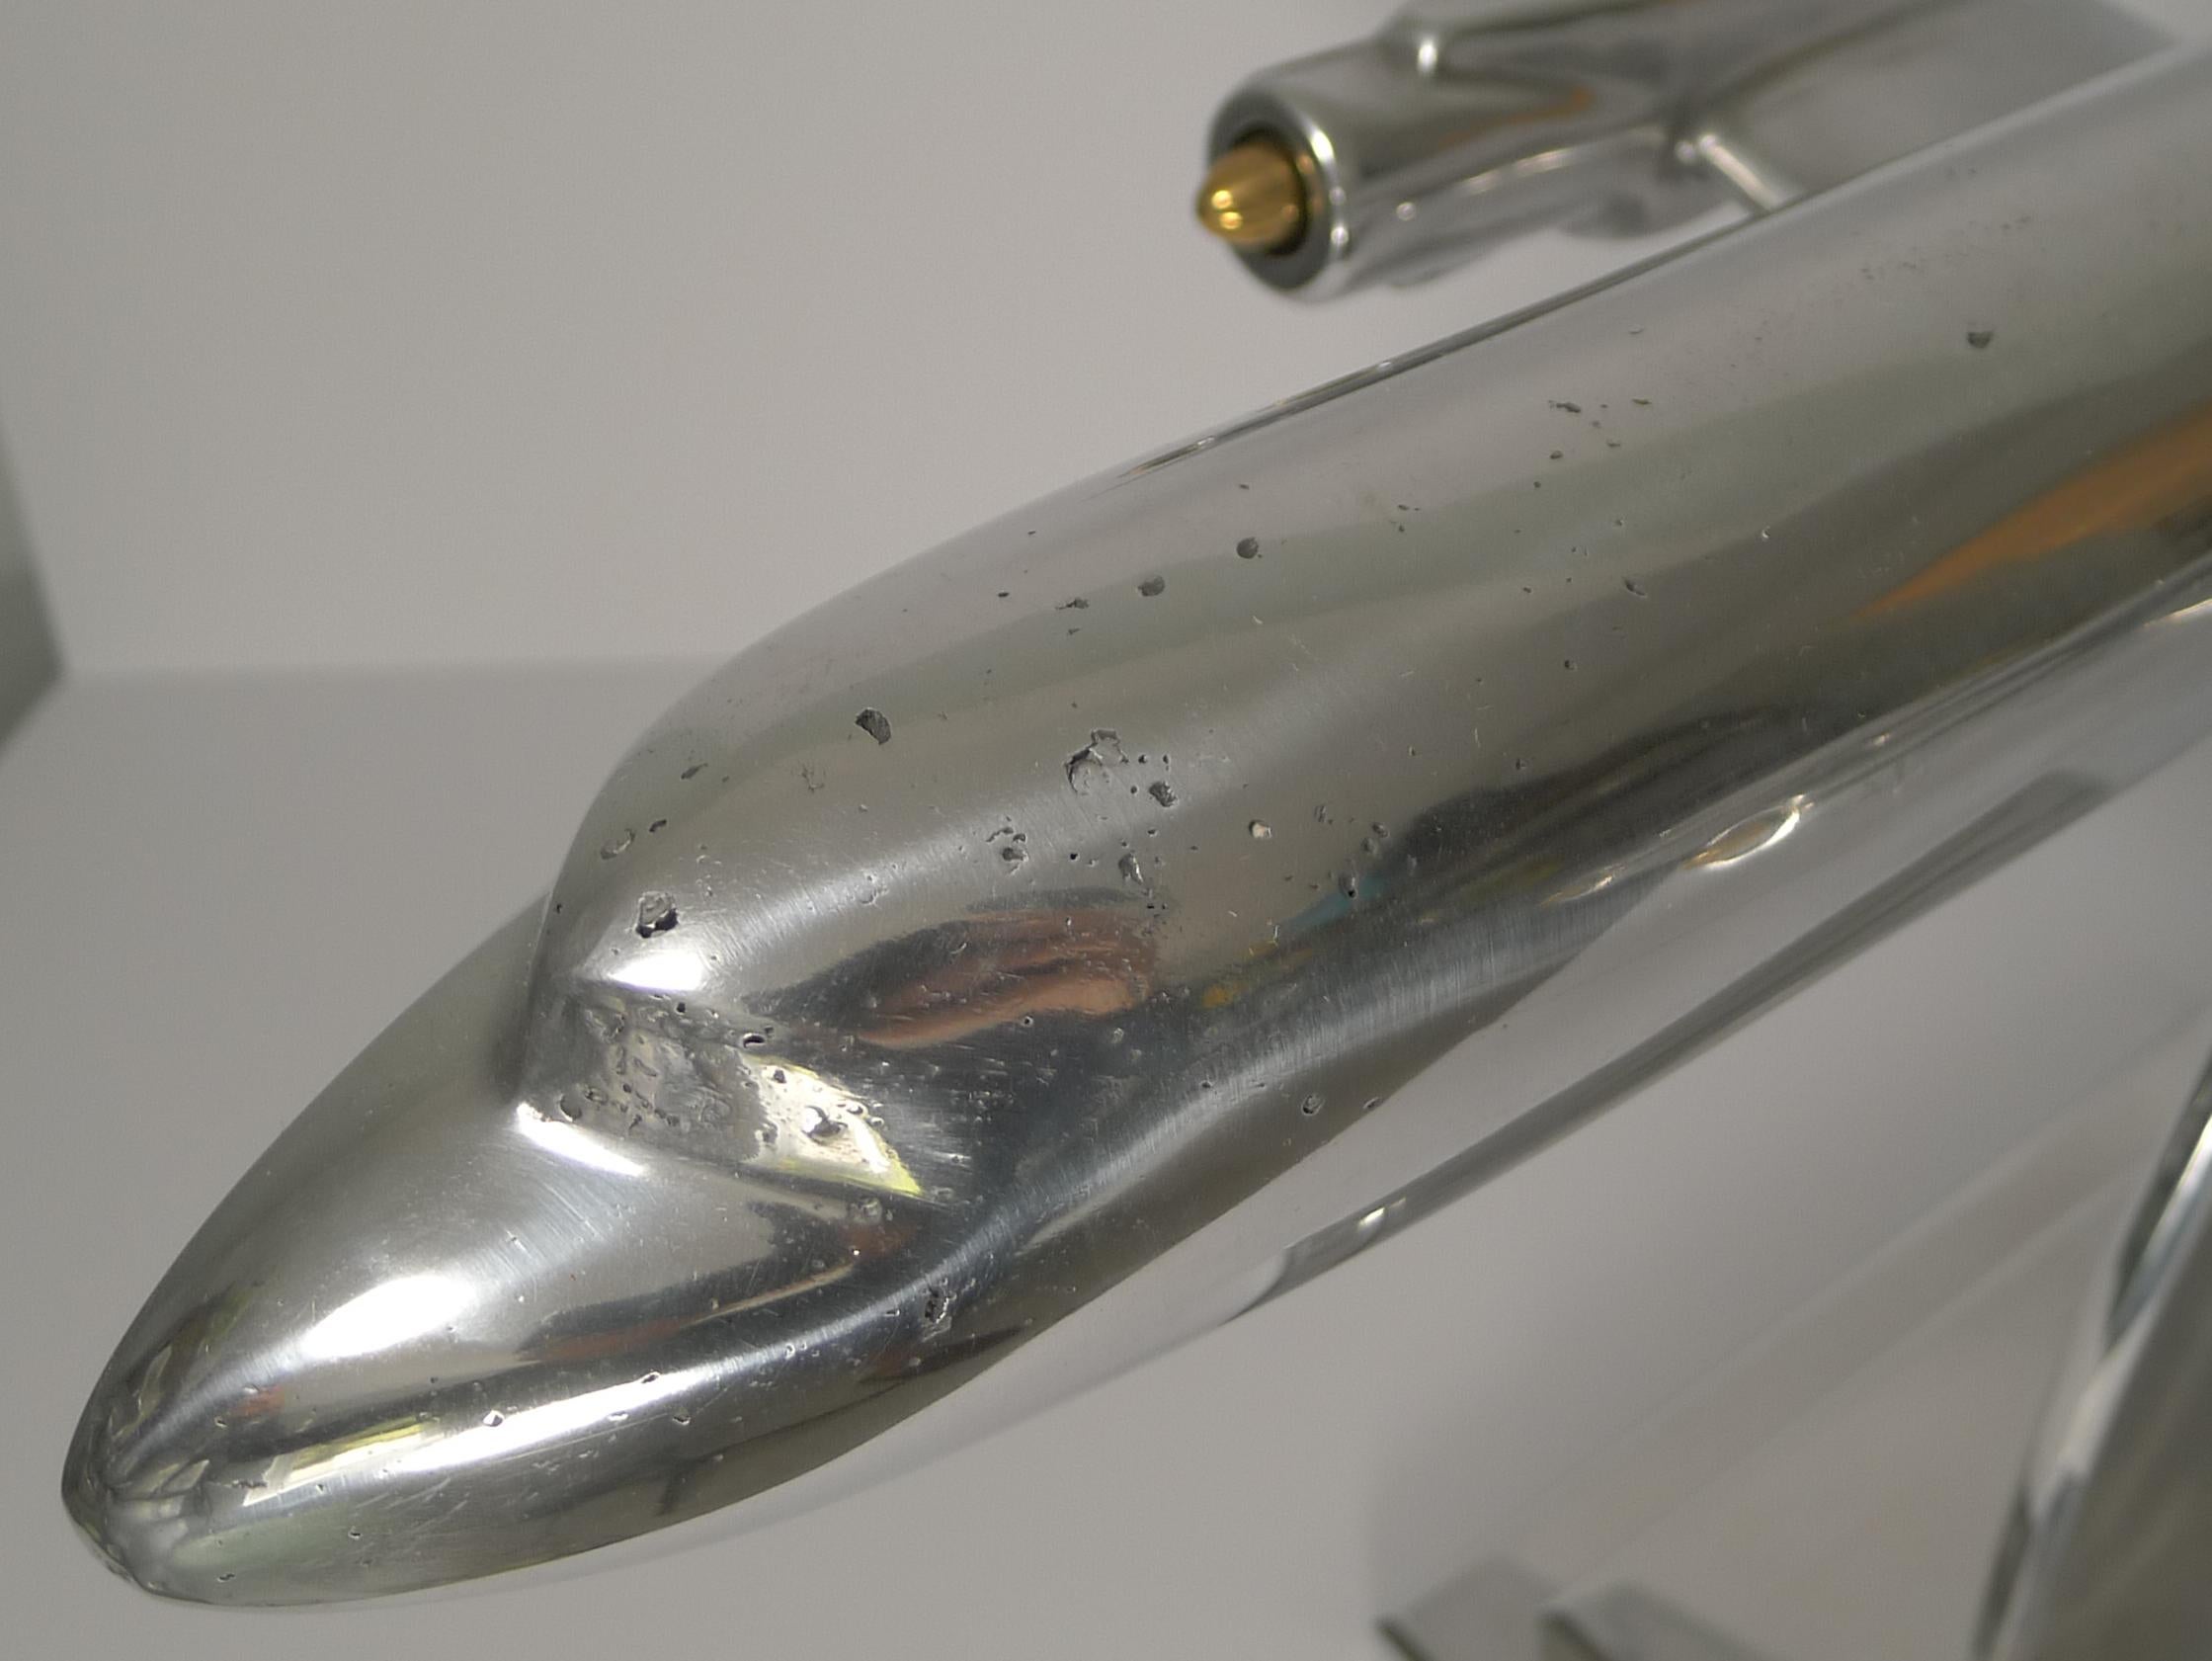 A fabulous and impressively sized aluminium model of a DC-7 plane which was built by the Douglas Aircraft Company from 1953-1958. It was the last major piston engine-powered transport made by Douglas, being developed shortly after the earliest jet